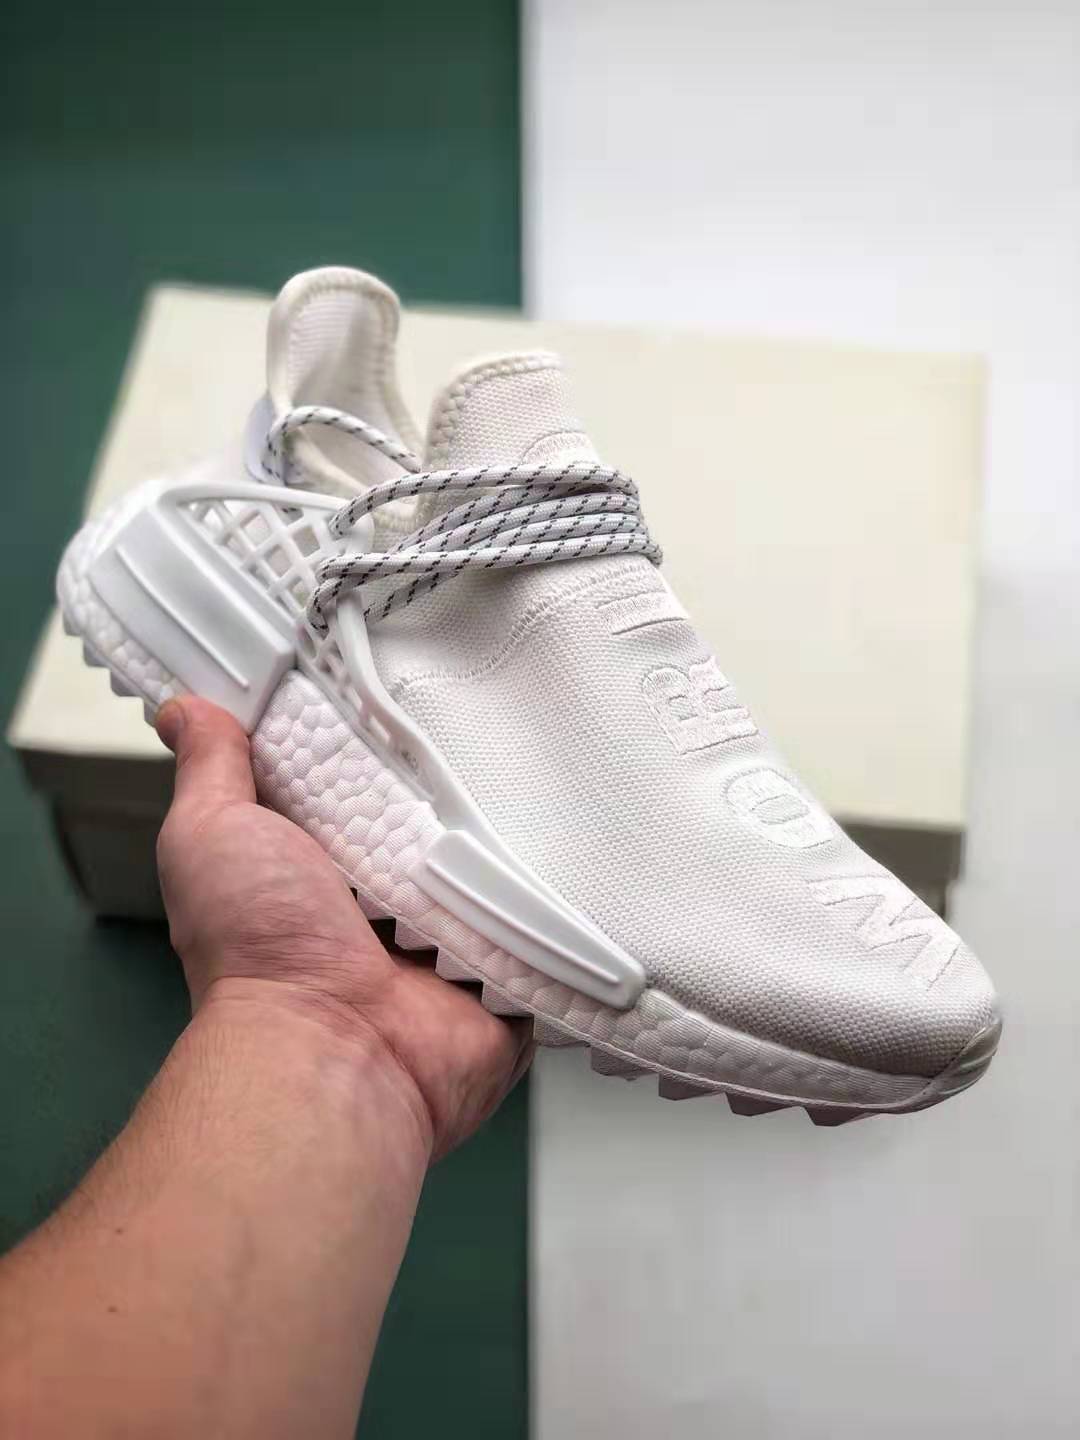 Adidas Pharrell x NMD Human Race Trail 'Blank Canvas' AC7031 - Limited Edition Release